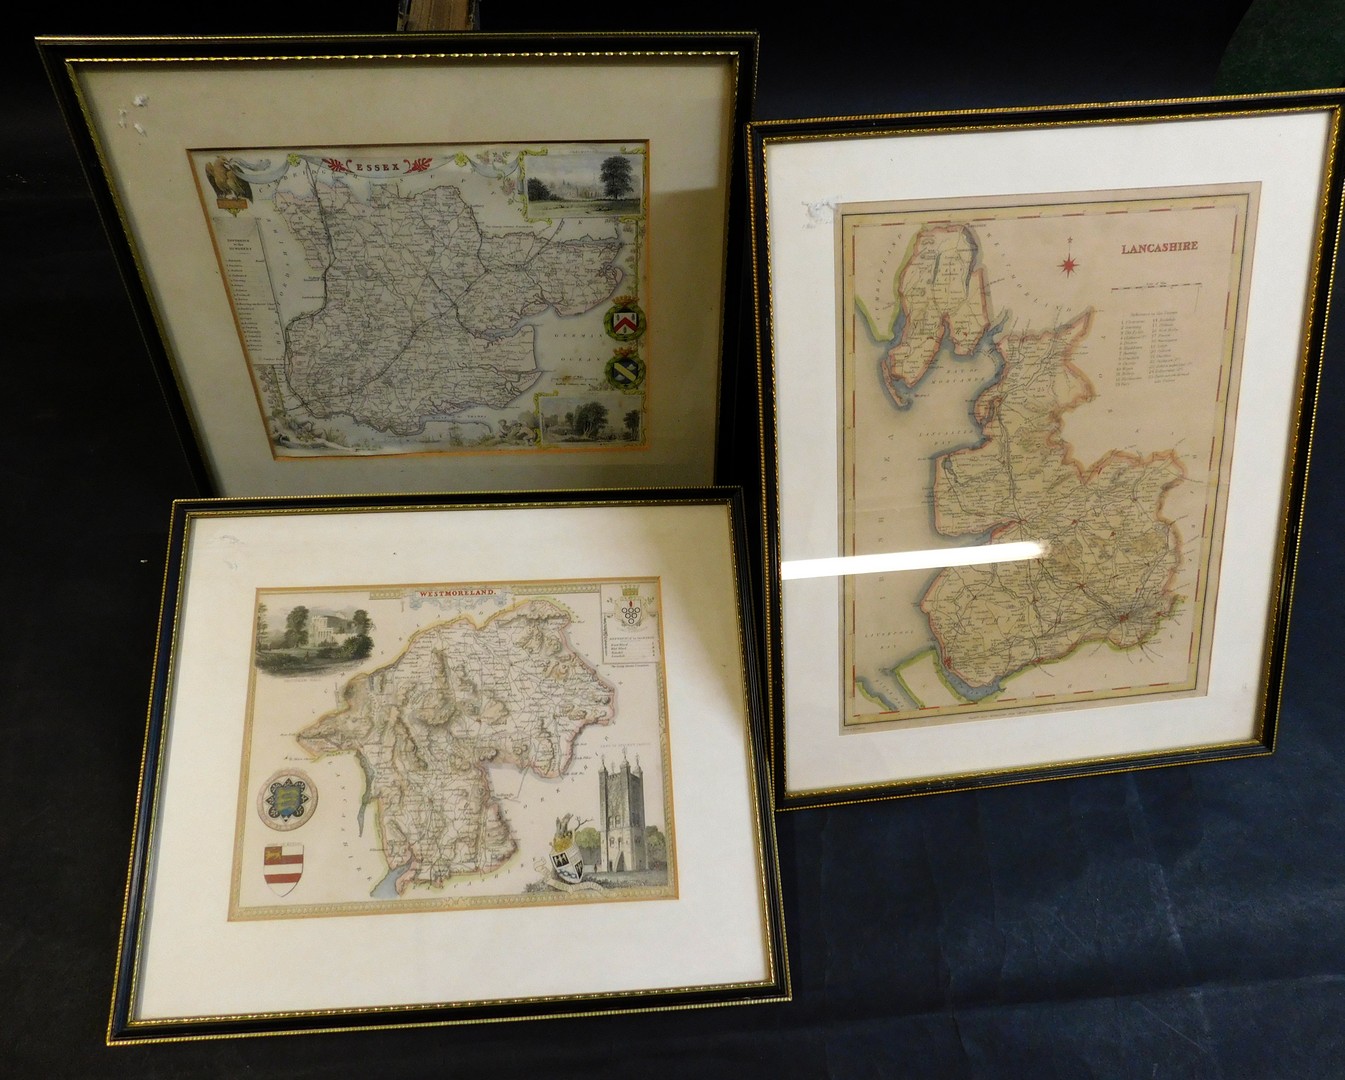 SAMUEL LEWIS: LANCASHIRE, hand coloured engraved map [circa 1838], framed and glazed, approx size